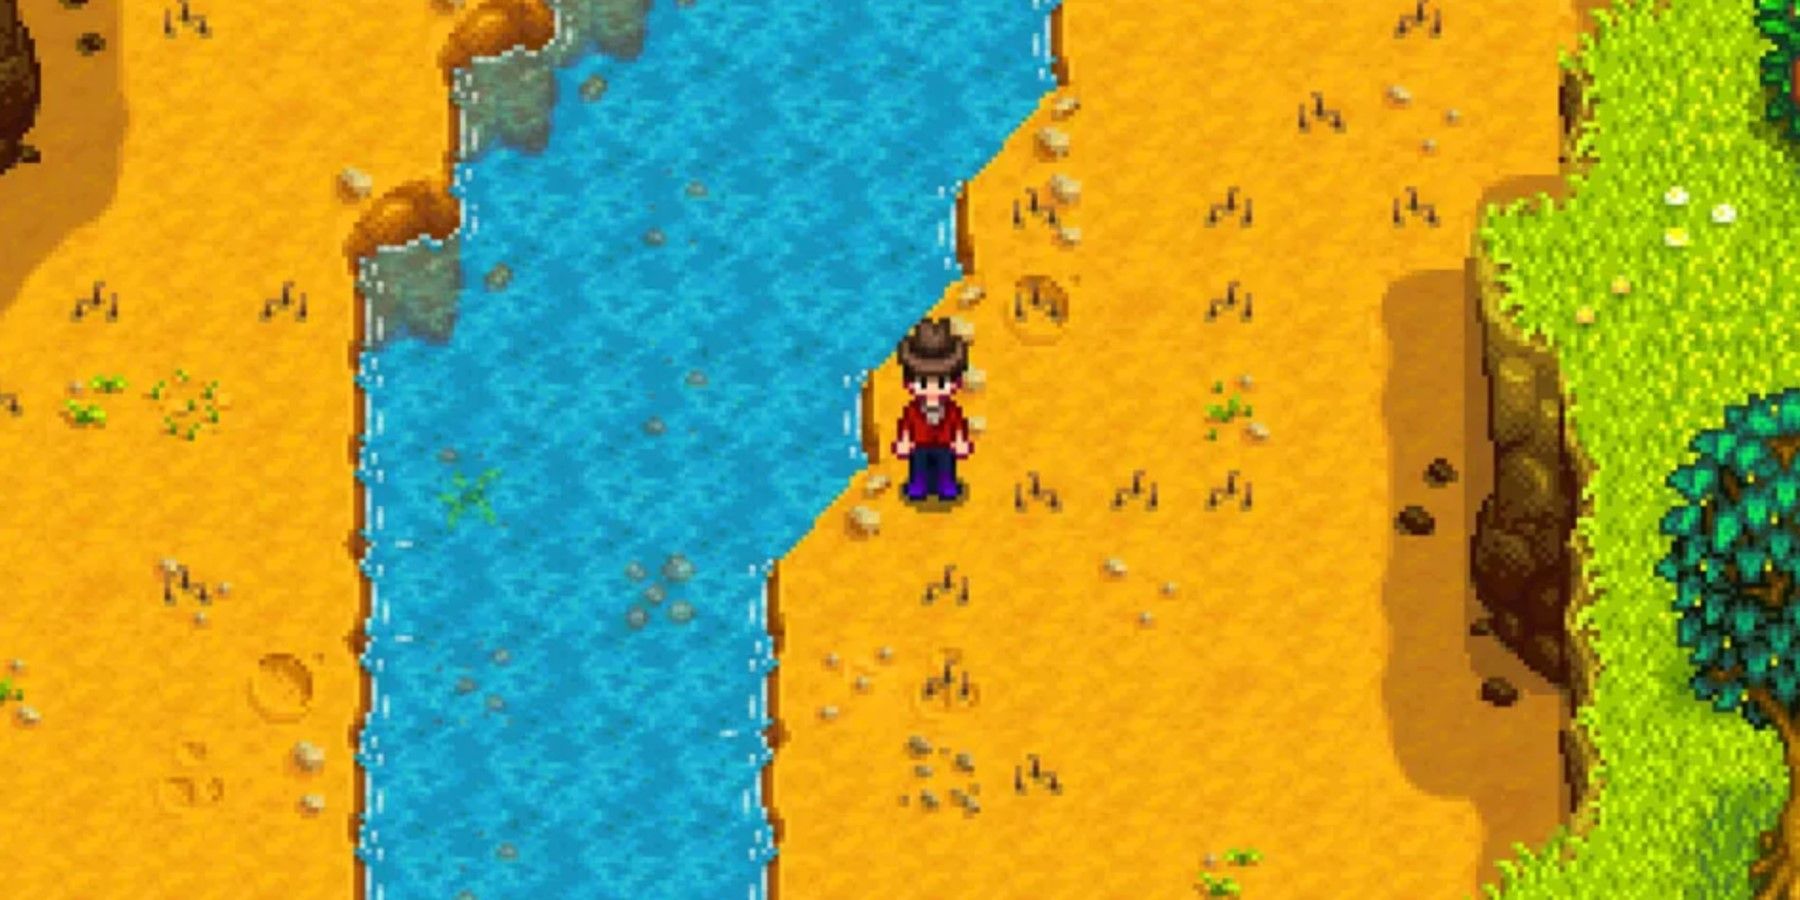 Stardew Valley multiple Artifact Spots by the river